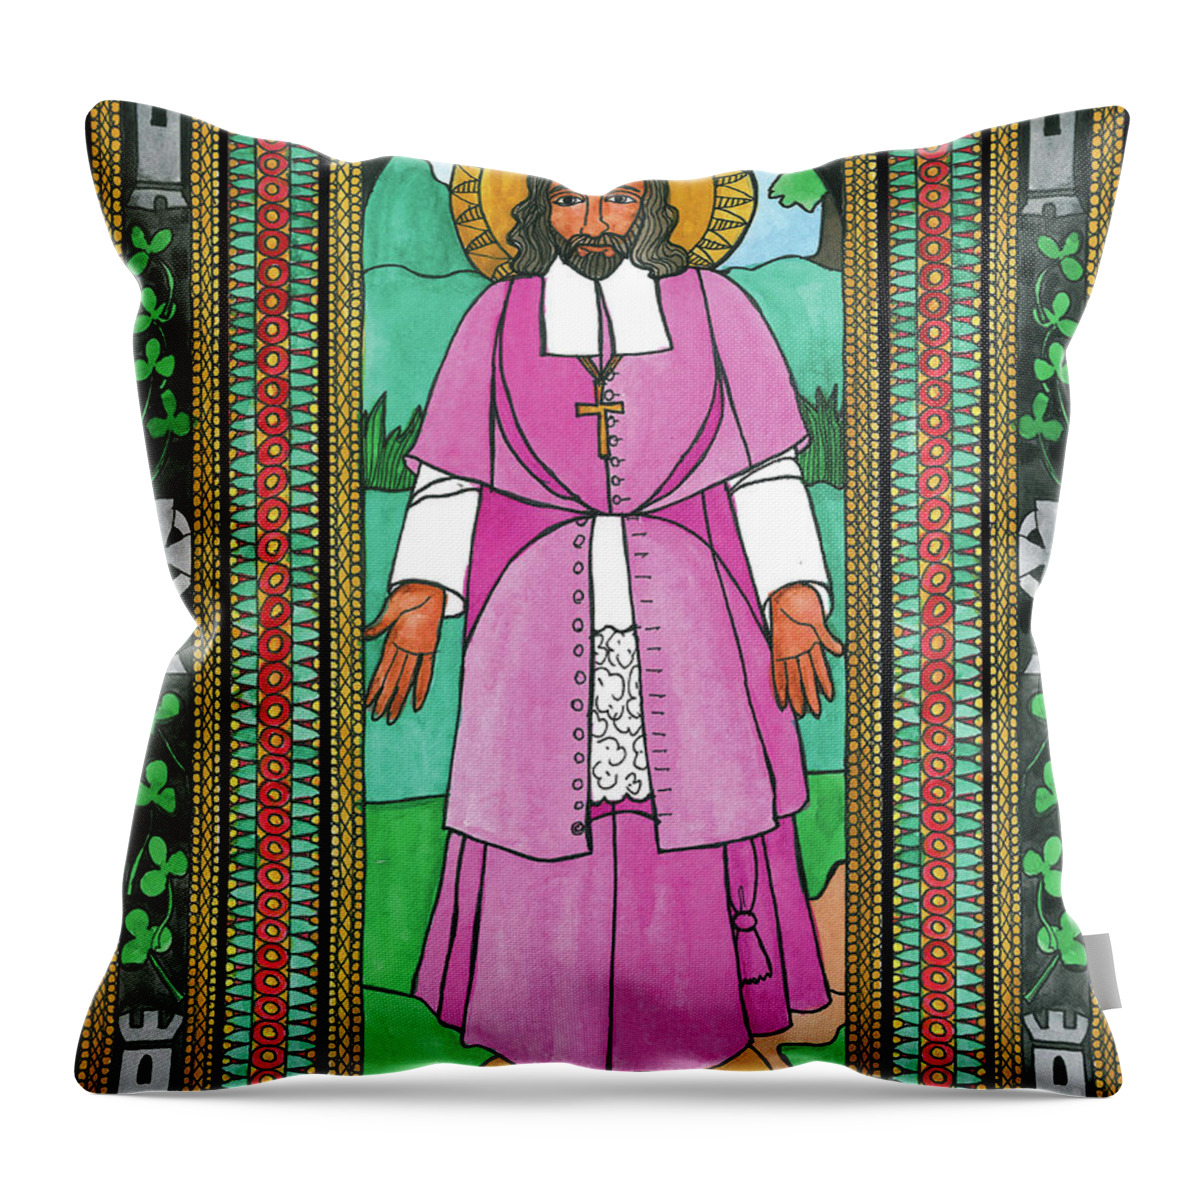 Saint Oliver Plunkett Throw Pillow featuring the painting St. Oliver Plunkett by Brenda Nippert